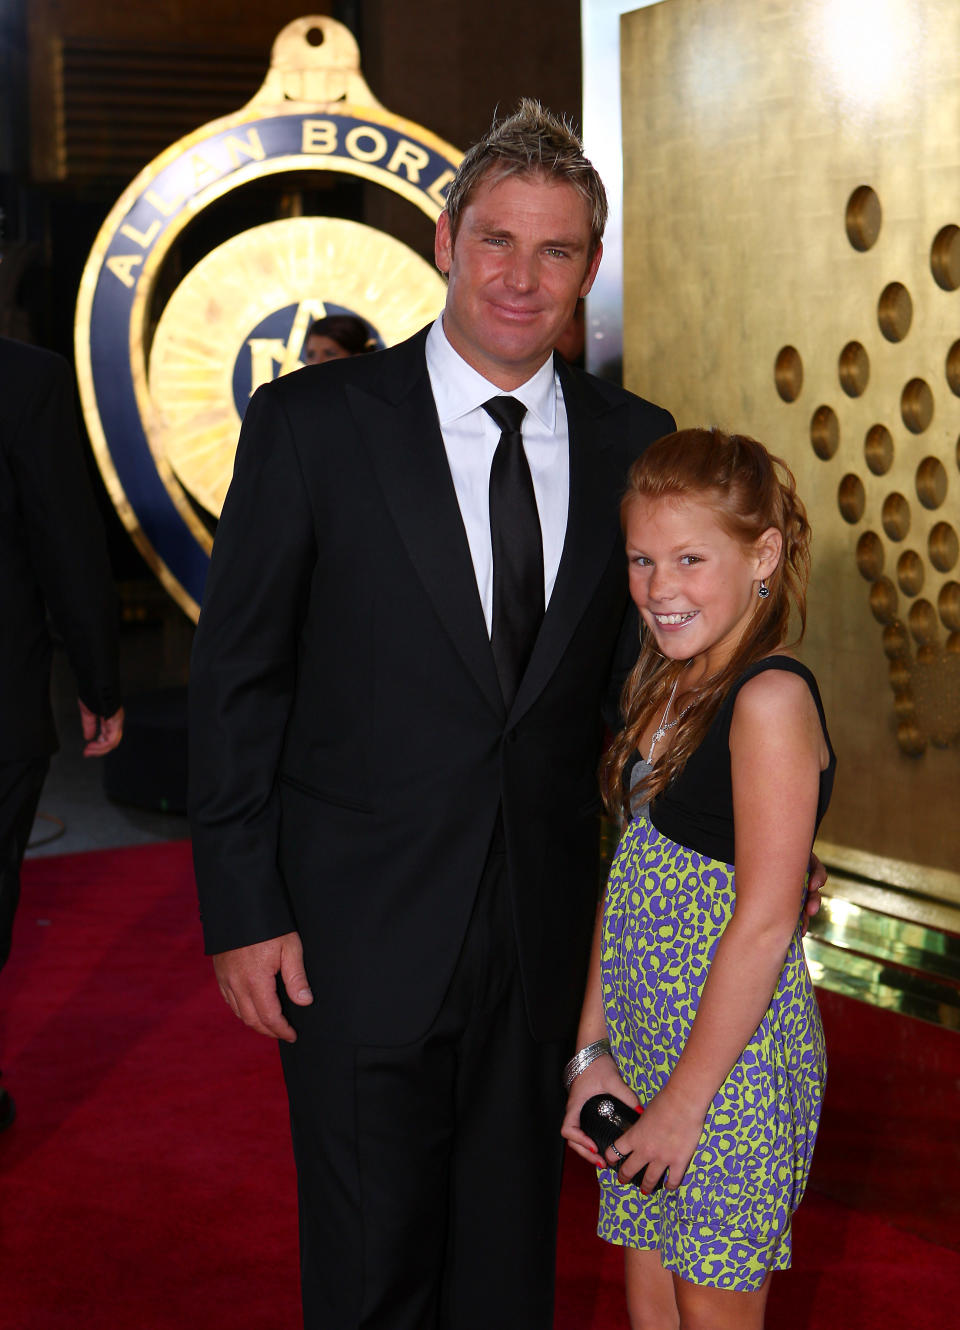 Shane Warne and daughter arrive on the red carpet at the Crown Casino in Melbourne for the 2008 Allan Border Medal  (Photo by Jon Buckle - PA Images via Getty Images)